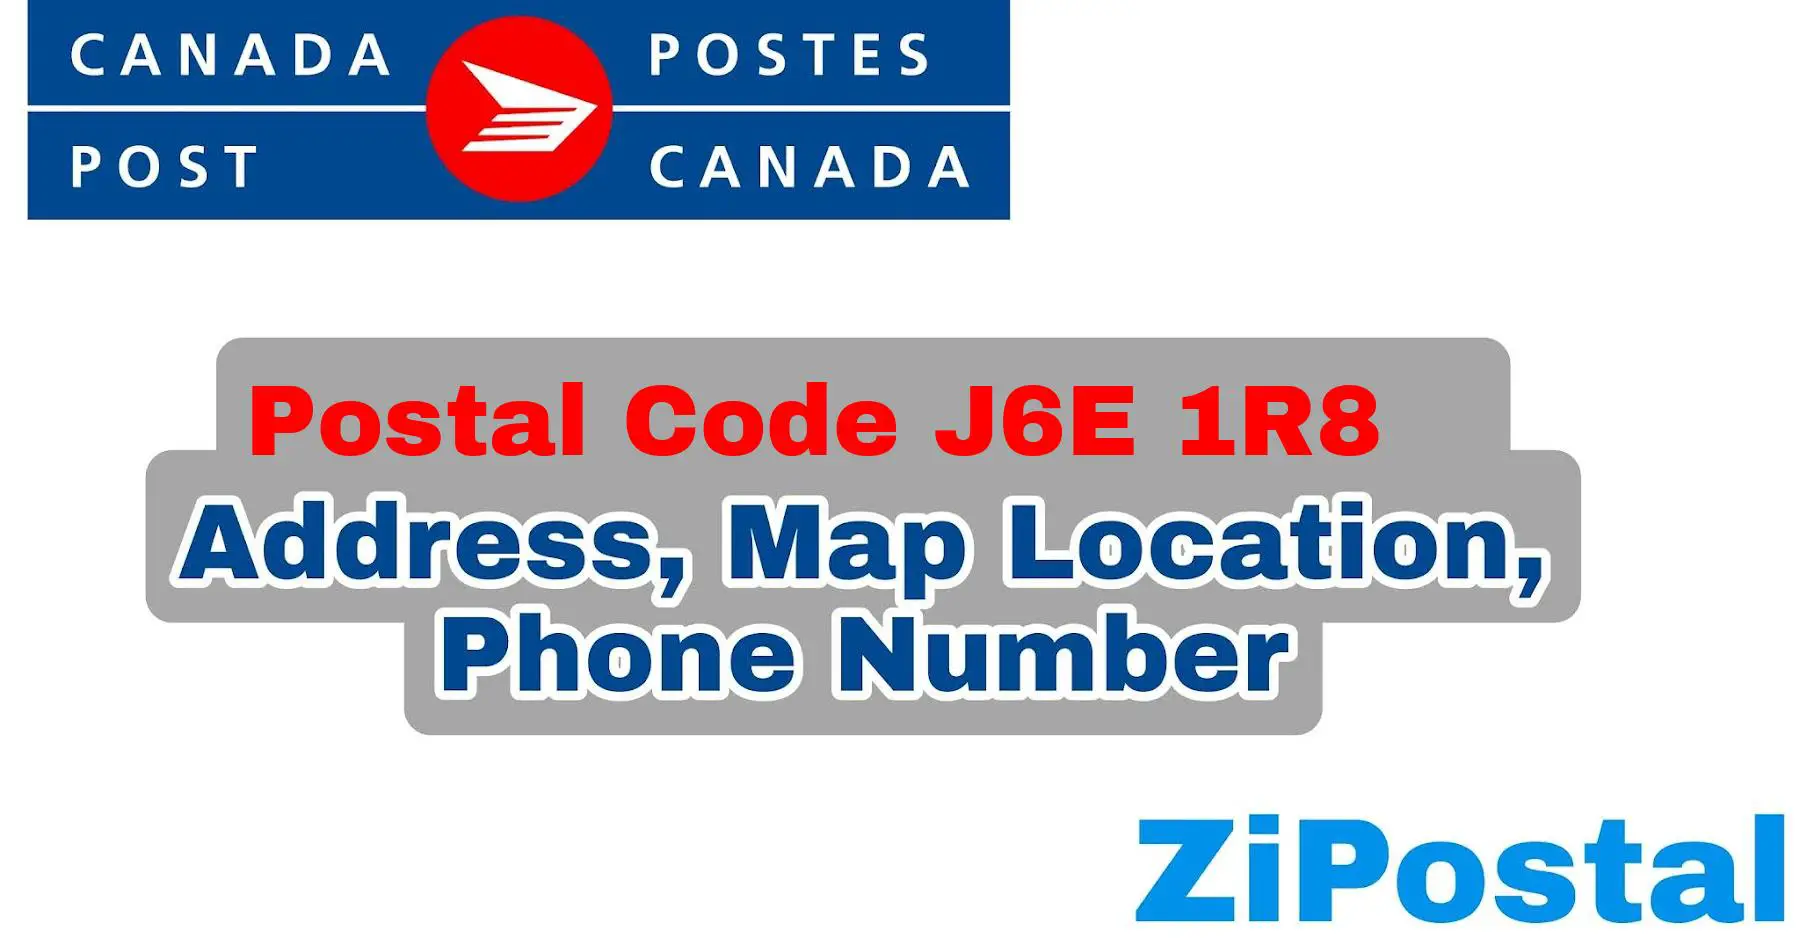 Postal Code J6E 1R8 Address Map Location and Phone Number